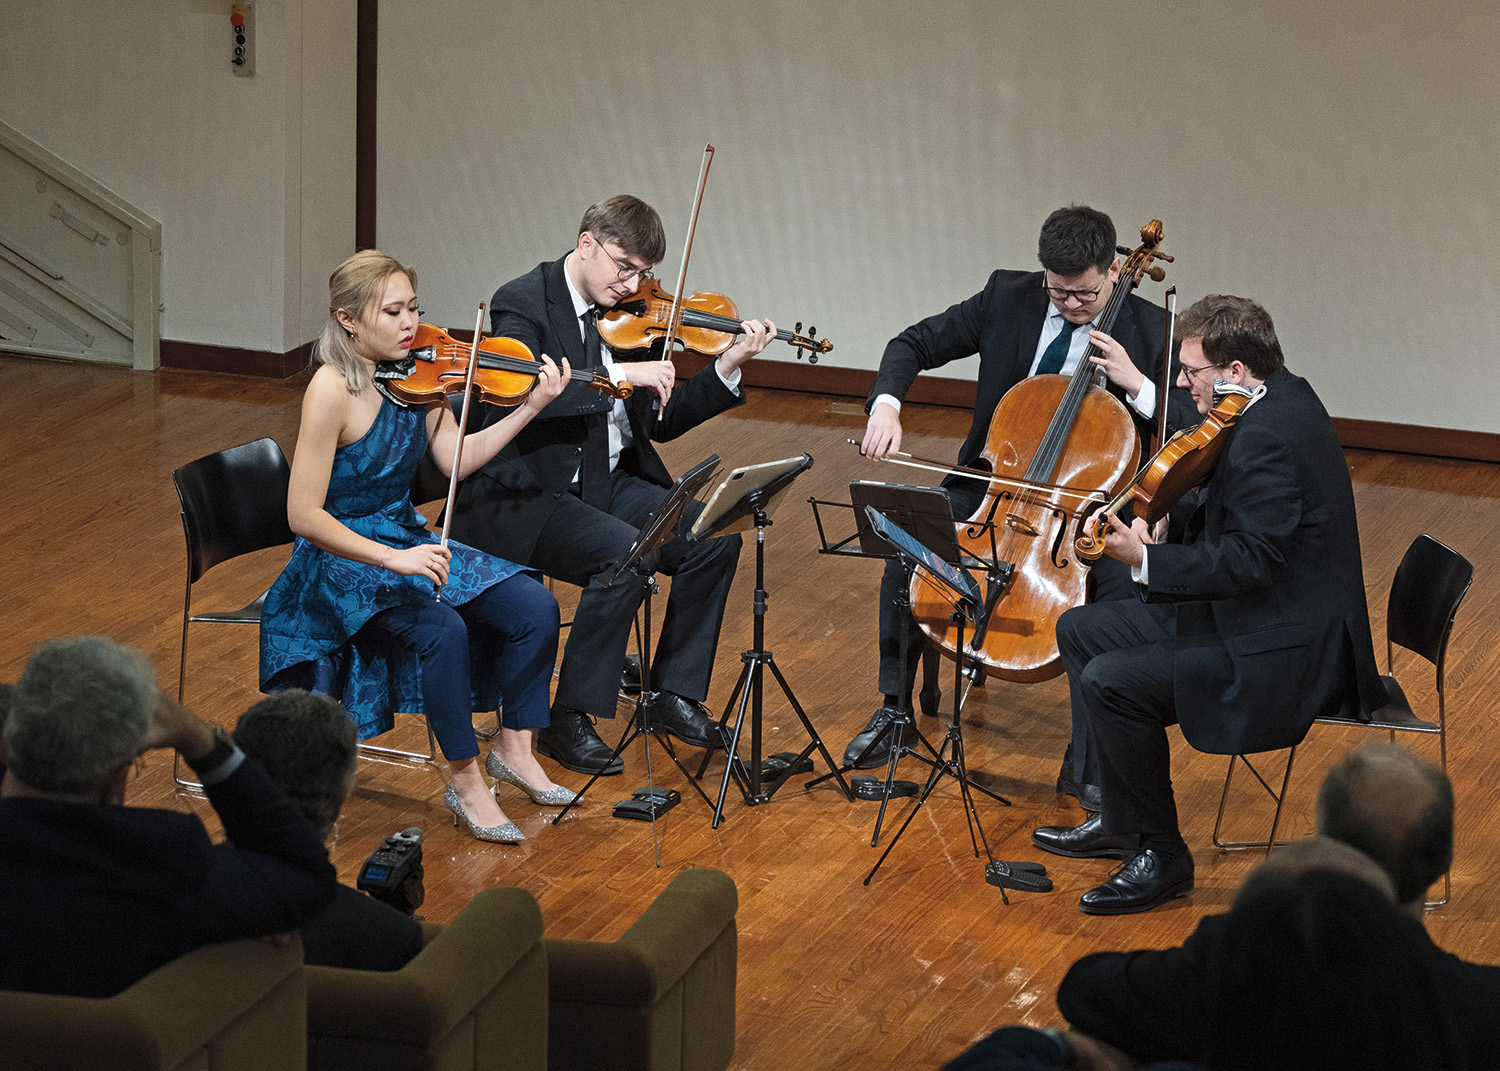 Four musicians sit in a semi-circle onstage facing music stands and sheet music. They are dressed in formal attire and play violas, violons, and violoncellos for a small audience.